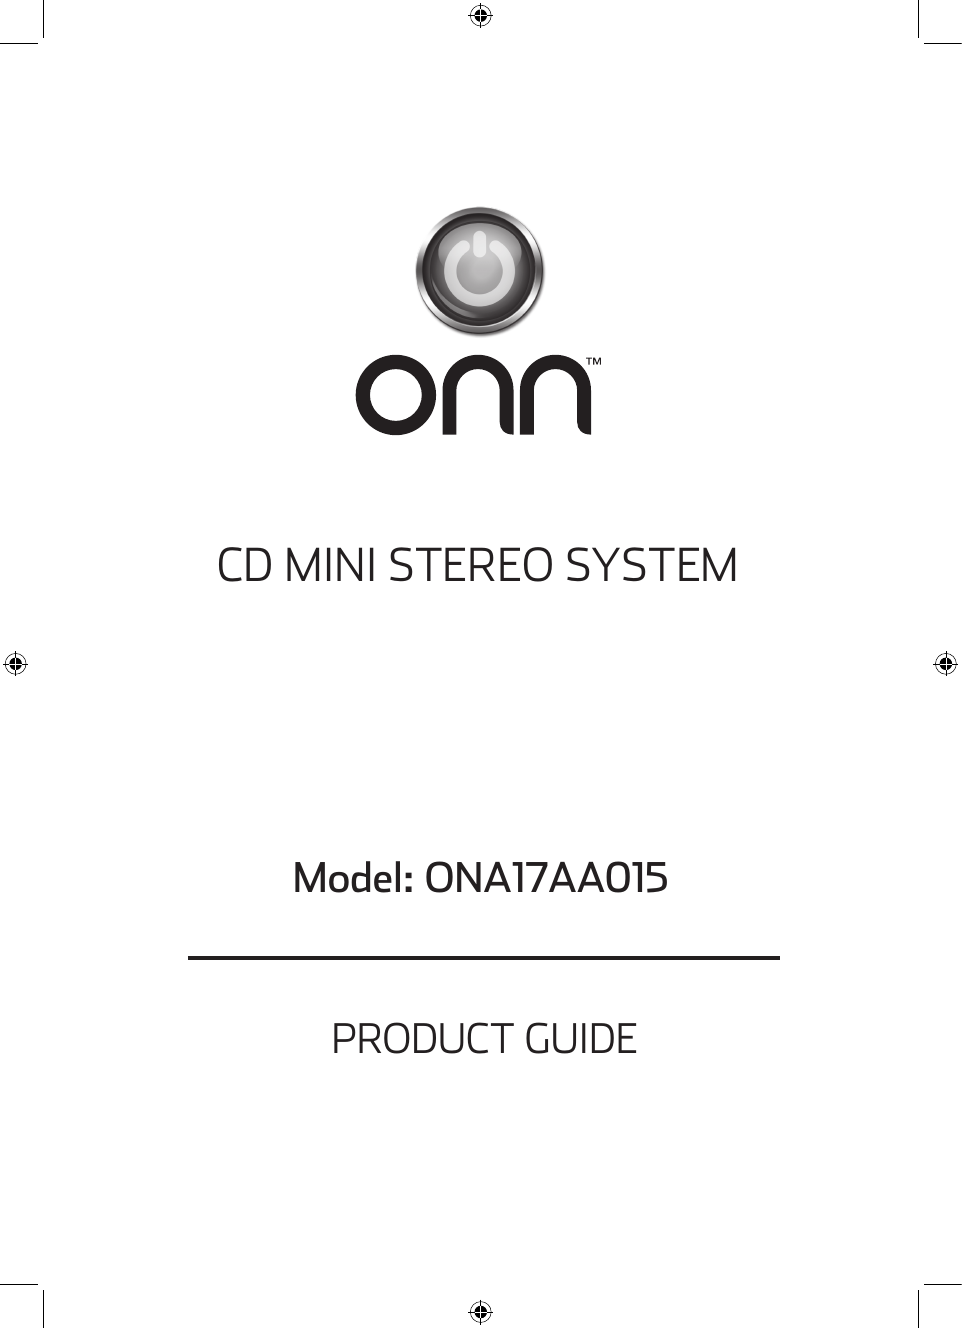 PRODUCT GUIDEModel: ONA17AA015CD MINI STEREO SYSTEM